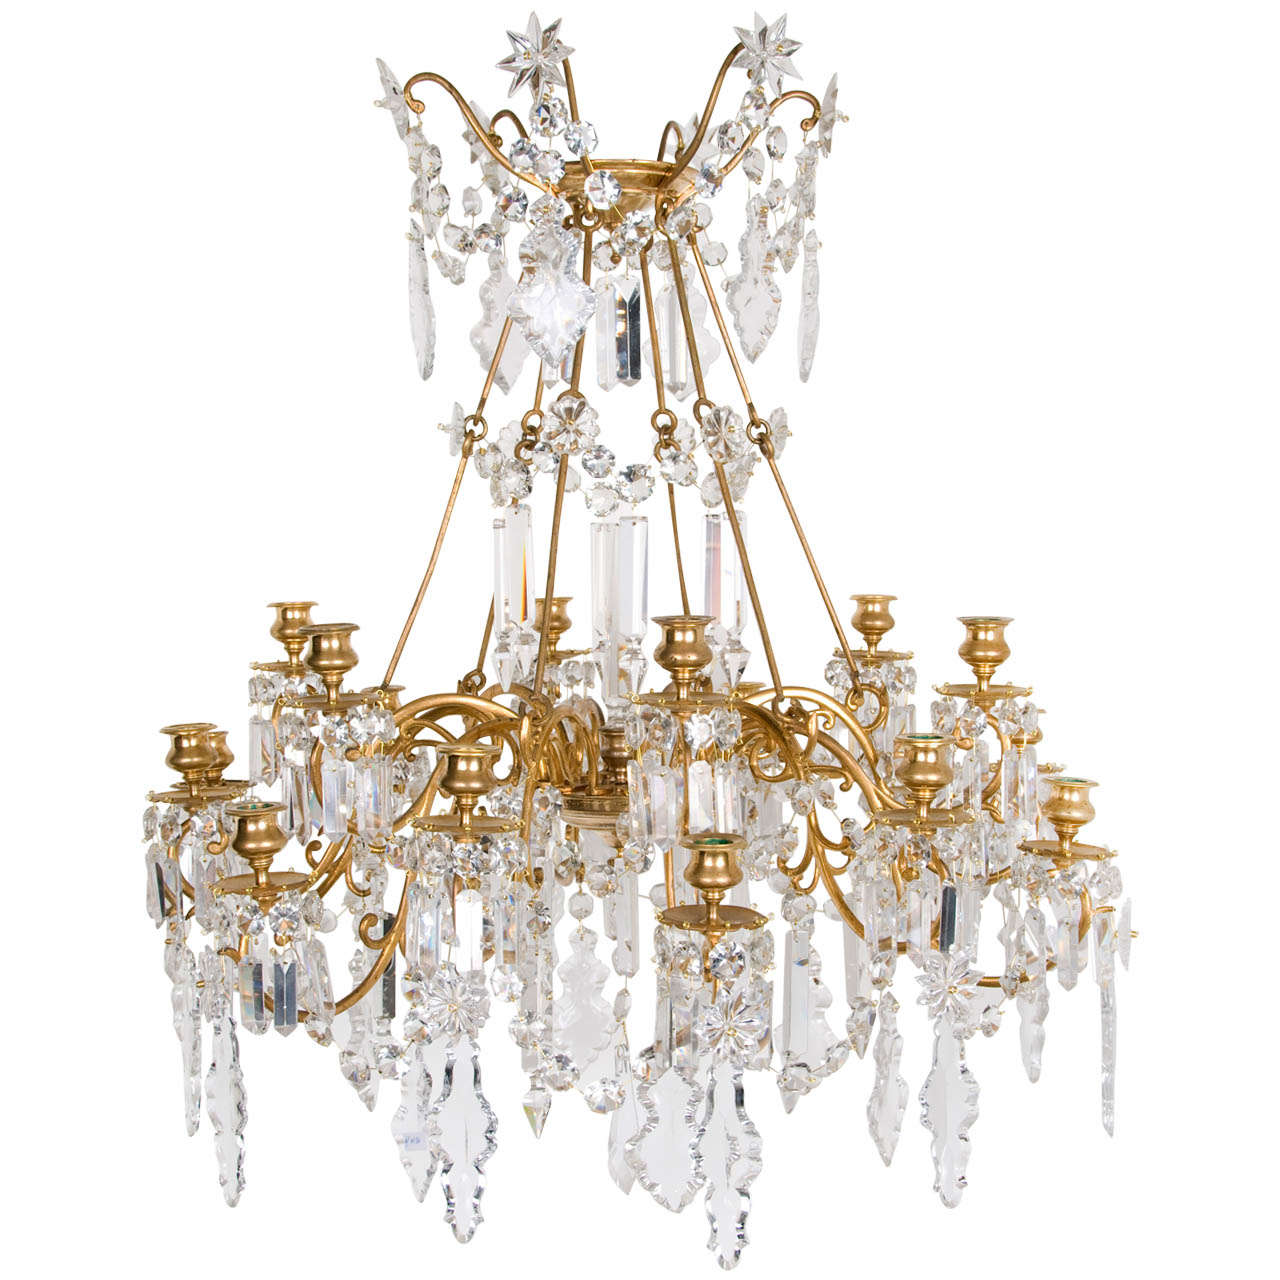 19th Century Baccarat Ormolu and Glass 18 Light Candelier For Sale